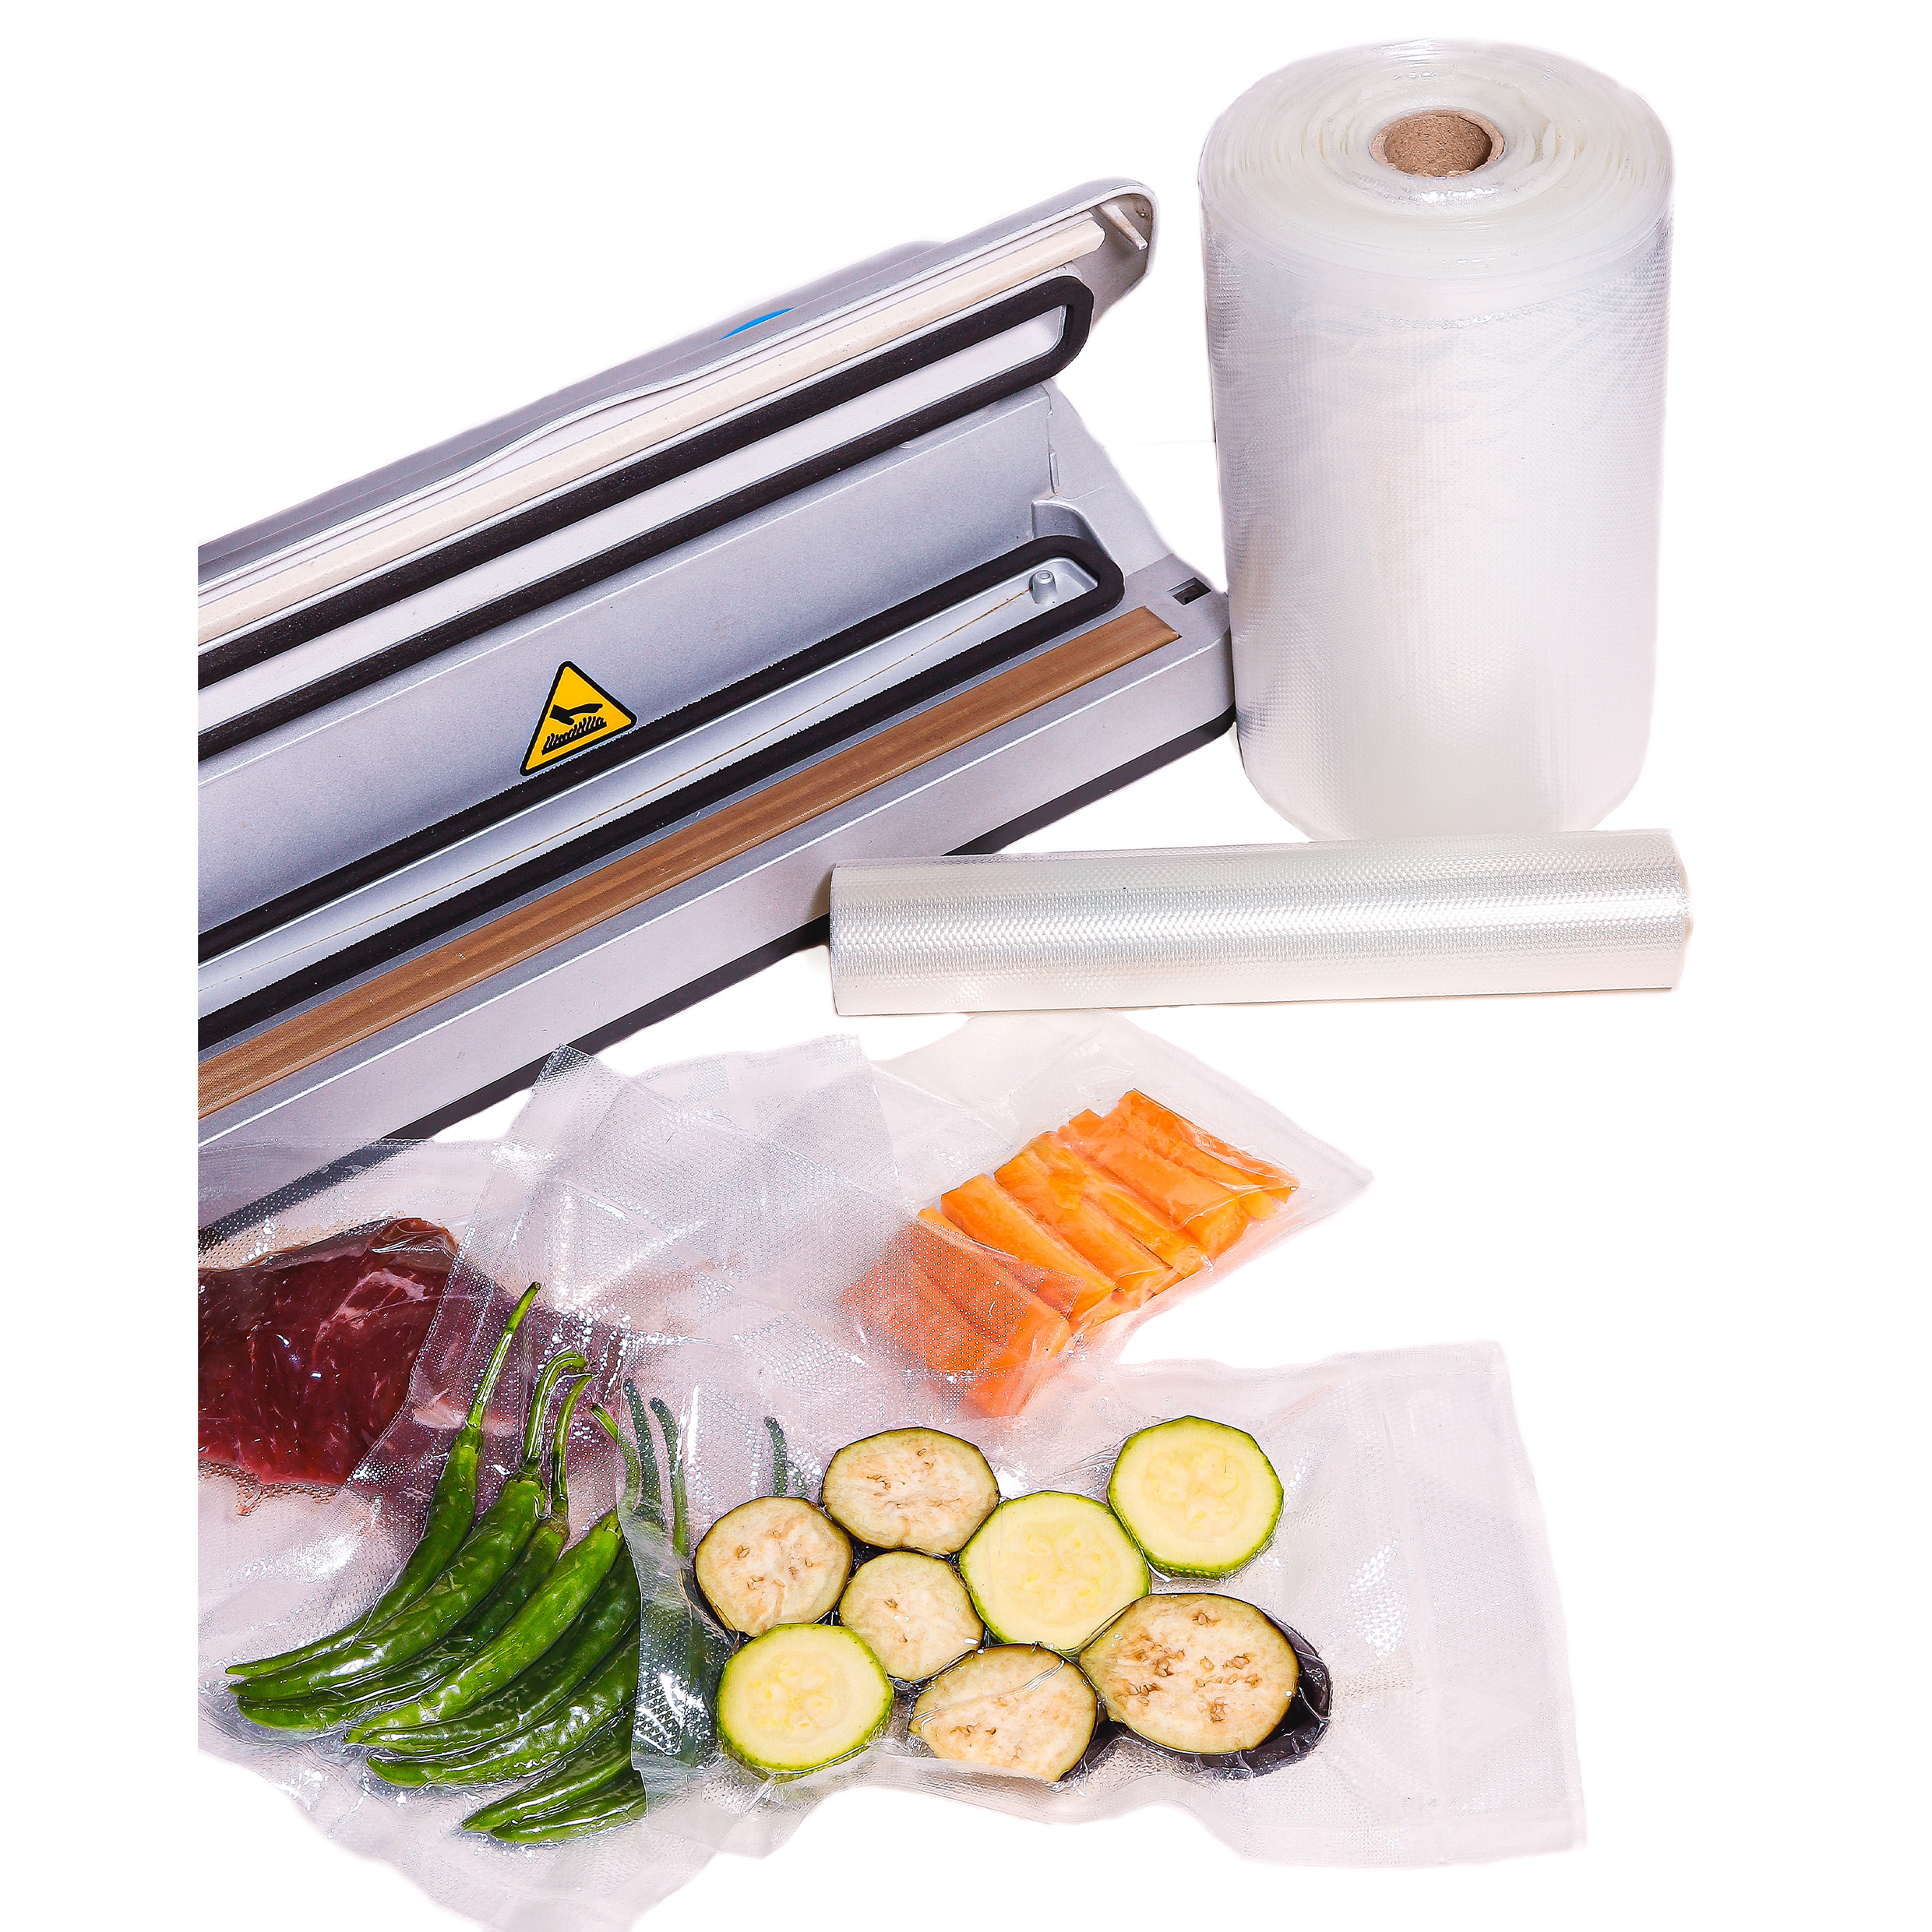 Vacuum channel Sealer Bags, Vacuum channel Sealer Bags Manufacturer, Vacuum  channel Sealer Bags Supplier│Daily Sealing